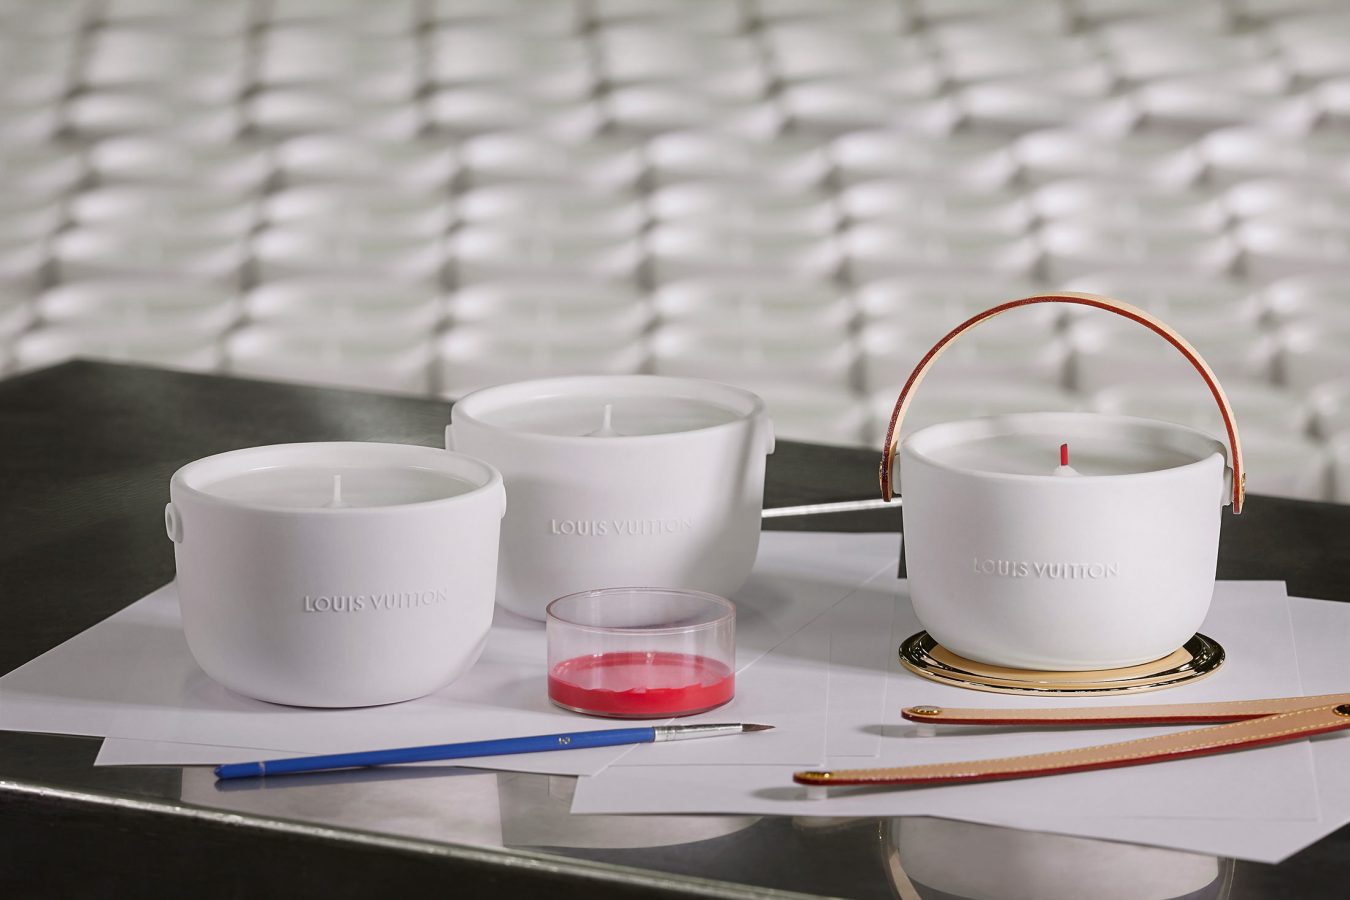 Louis Vuitton - A journey, at home. Introducing Louis Vuitton Perfumed  Candles, four fragrances dedicated for the home by Jacques Cavallier  Belletrud in a design by Marc Newson. Discover the new collection